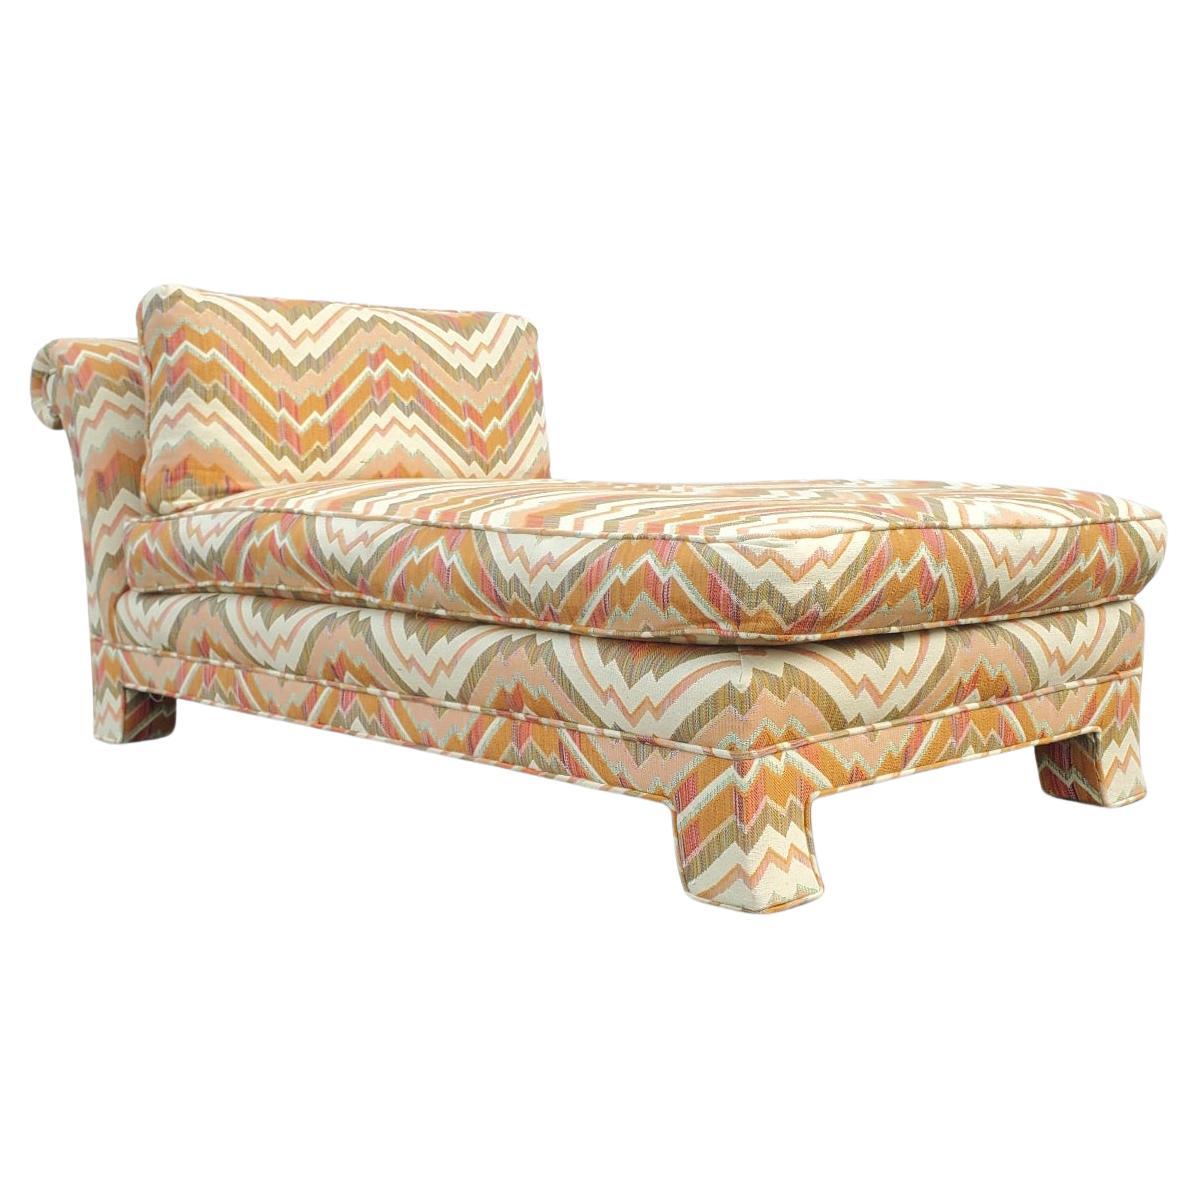 Bernhardt Flair Chaise Lounge  For Sale